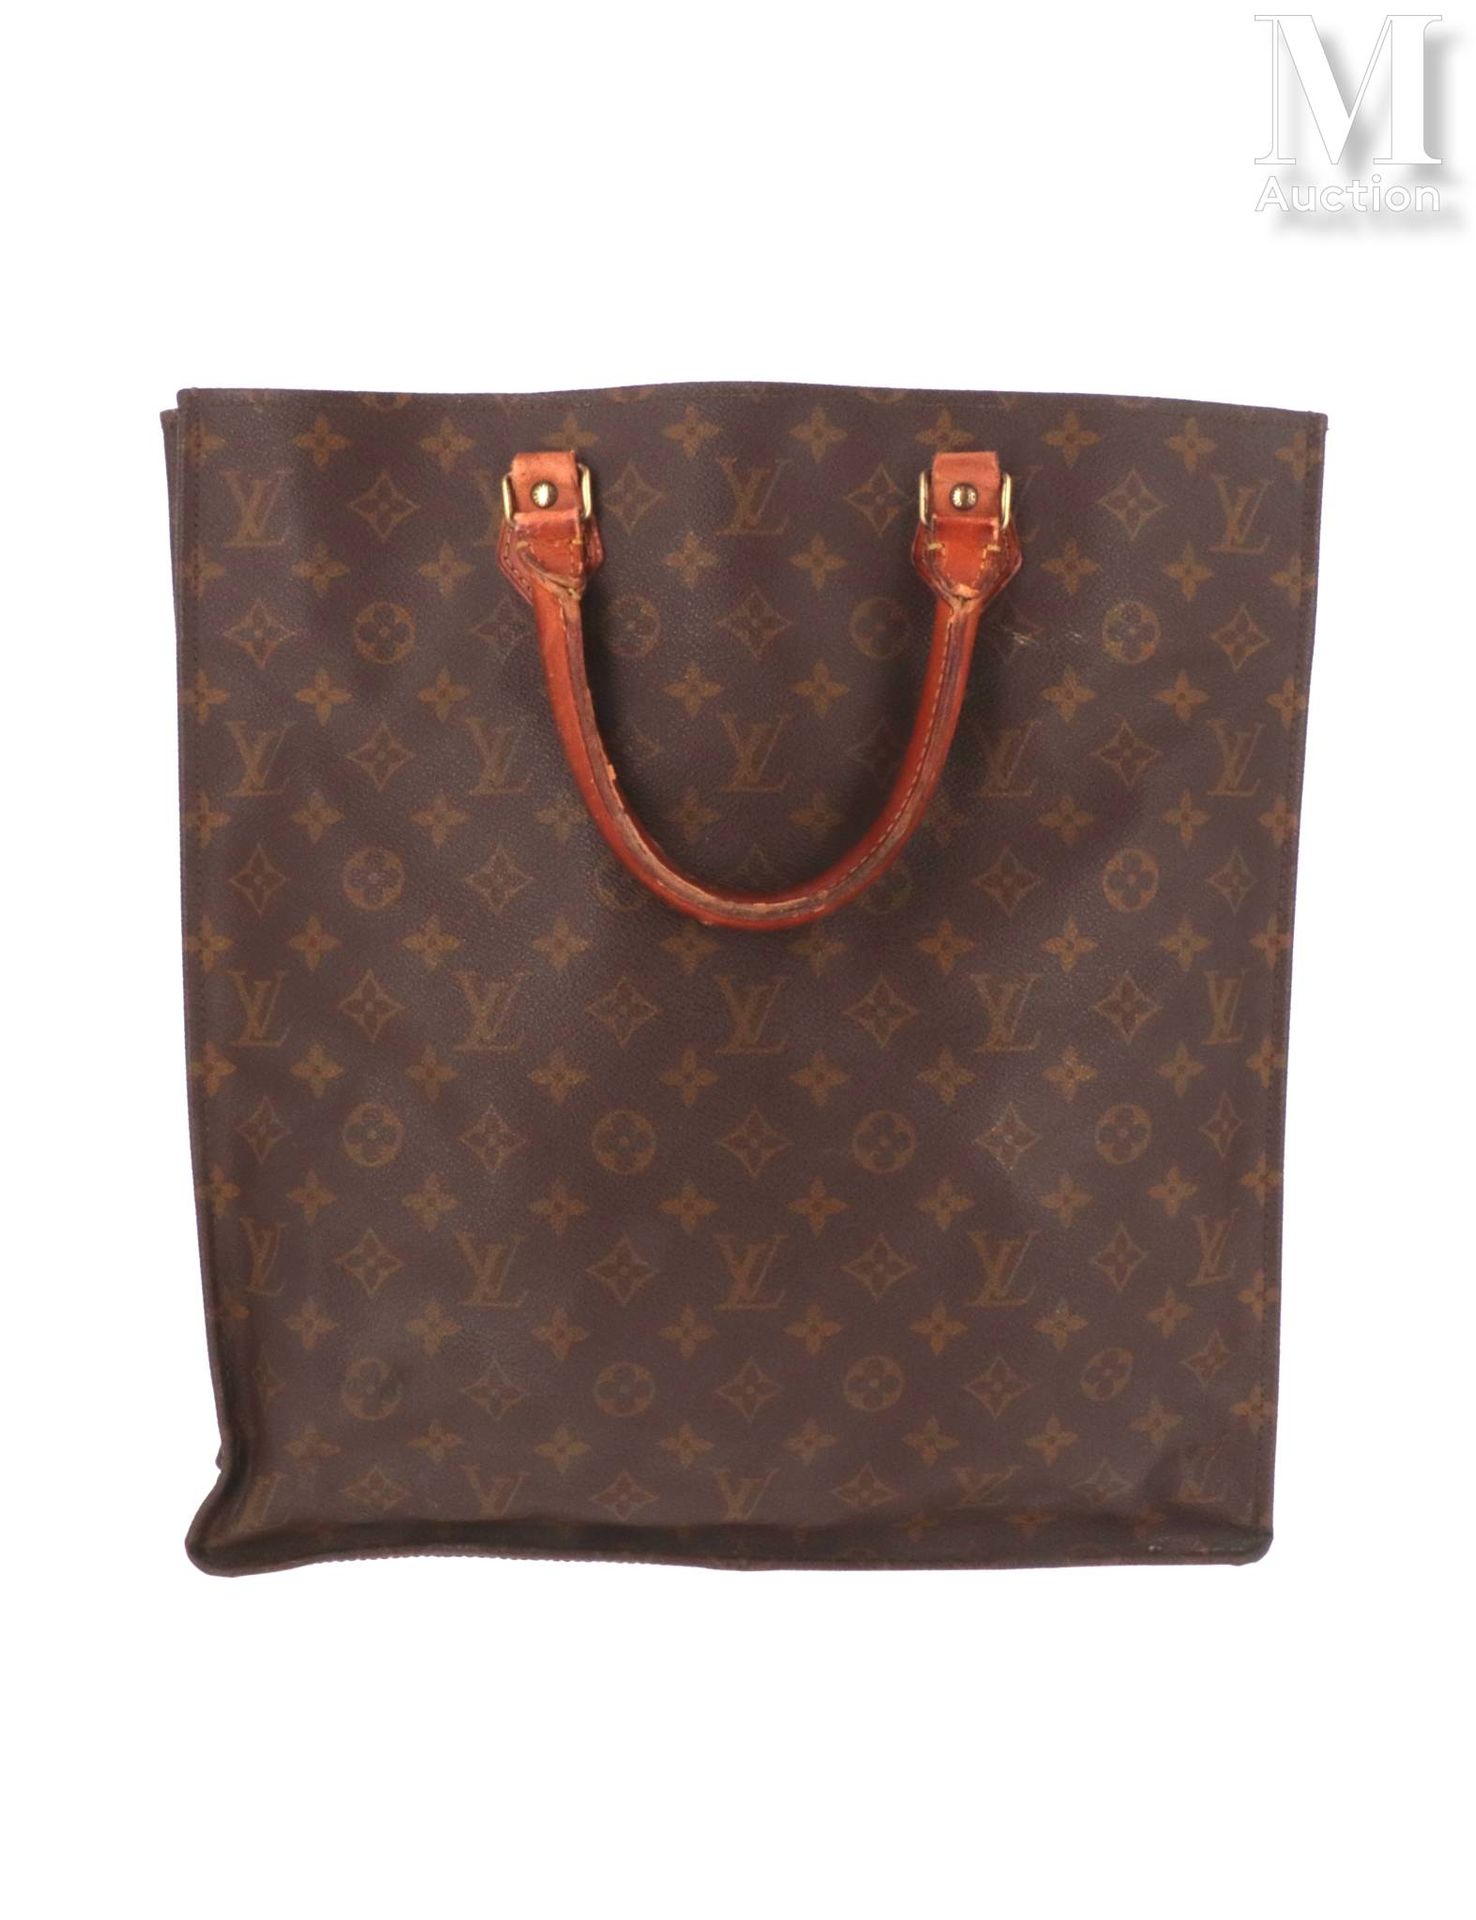 LOUIS VUITTON Flat" bag
in Monogram canvas and natural leather, golden brass tri&hellip;